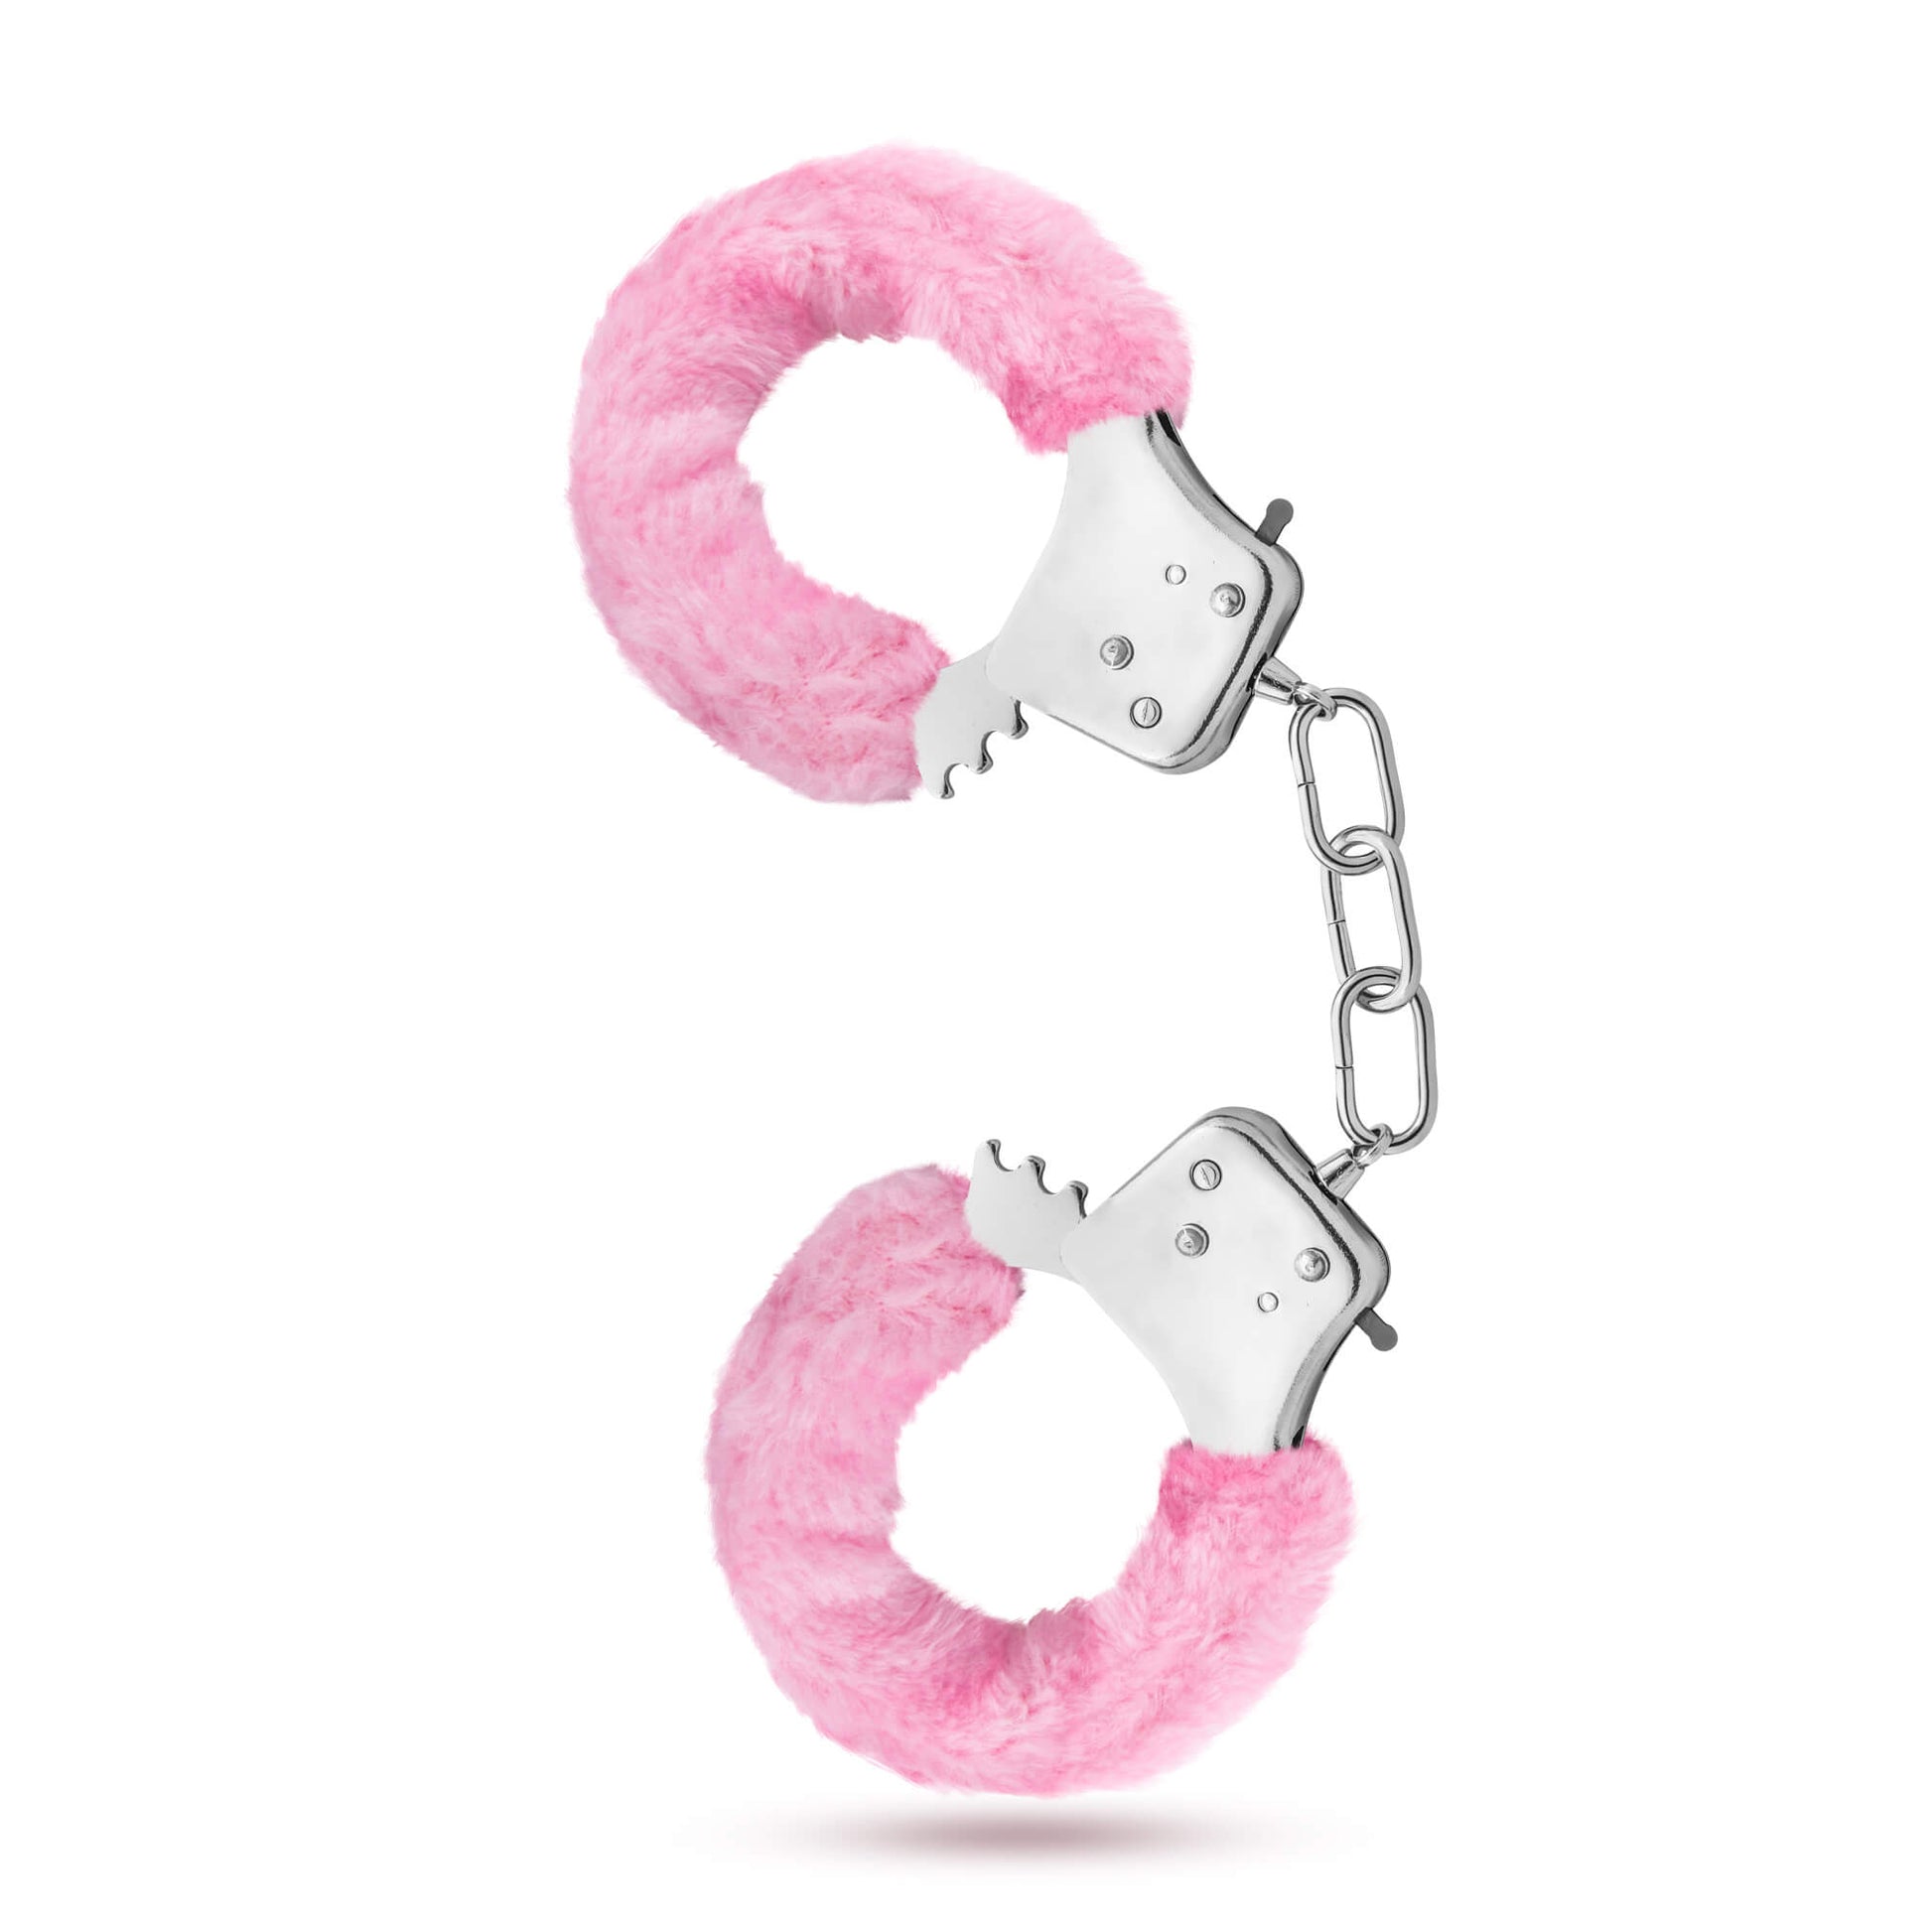 Temptasia Cuffs in pink - Blush Novelties - by The Bigger O  - an online sex toy shop. We ship to USA, Canada and the UK.